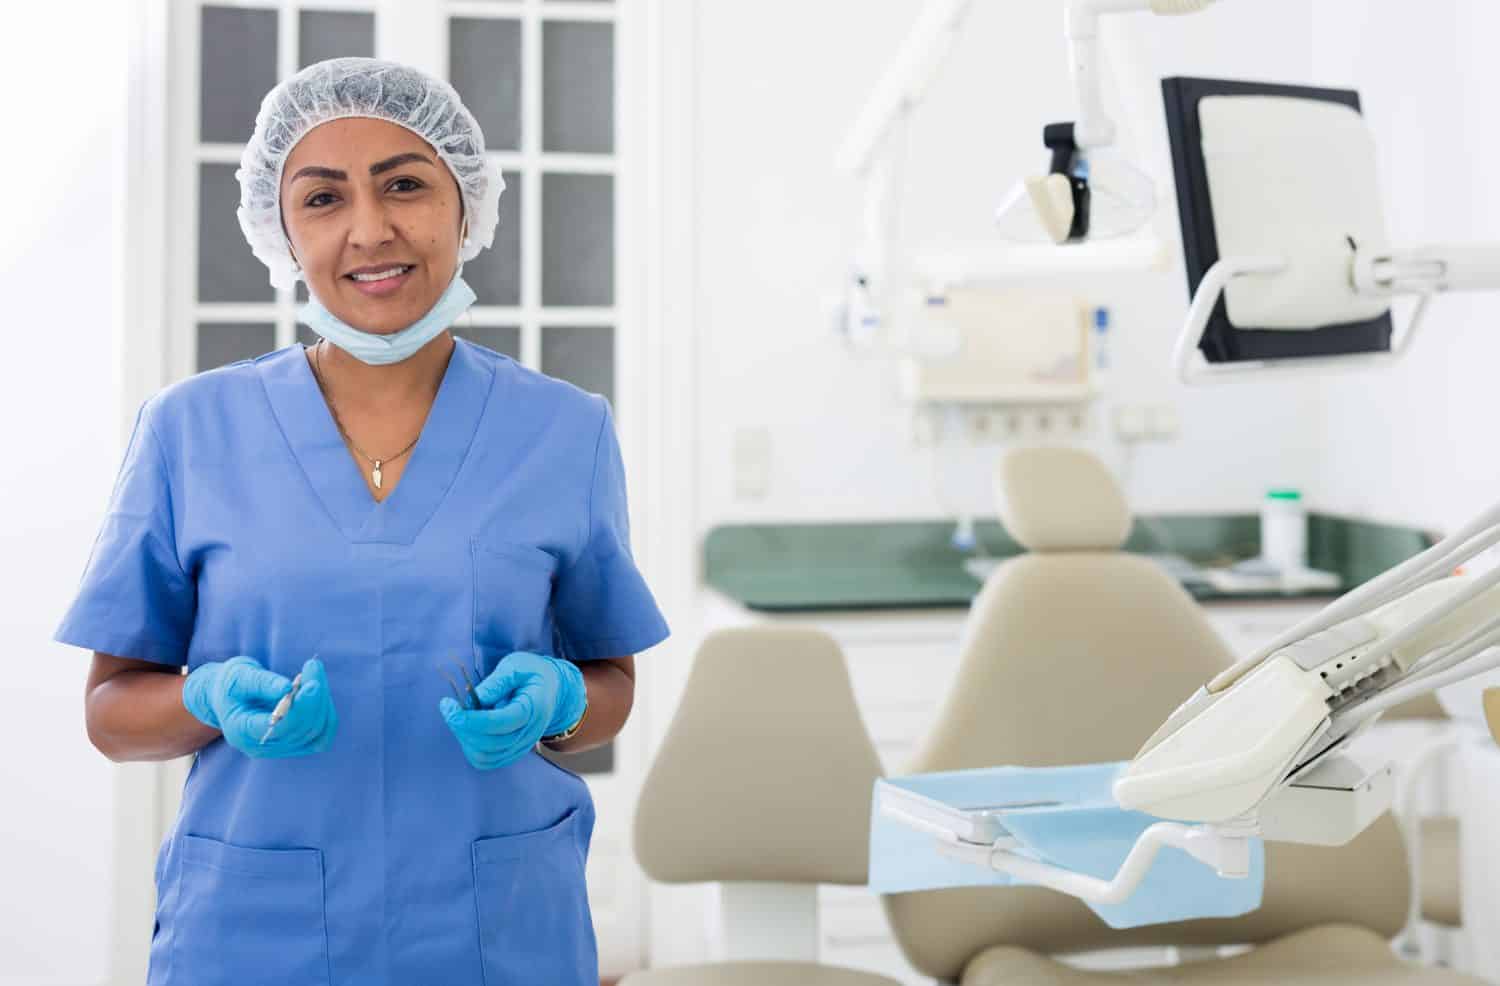 <p>The quality of dental care in <a href="https://a-z-animals.com/animals/location/central-america/costa-rica/?utm_campaign=msn&utm_source=msn_slideshow&utm_content=1325906&utm_medium=in_content">Costa Rica</a> ranks as high as that found in the United States, Canada, and other highly developed nations. They also have a good reputation in bariatric surgery, oncology, and eye surgeries. The <a href="https://recoverycenterchetica.com/">CheTica Ranch</a> is a popular place for medical tourists to relax and recover after having a procedure done in this tropical paradise.</p><p>Sharks, lions, alligators, and more! Don’t miss today’s latest and most exciting animal news. <strong><a href="https://www.msn.com/en-us/channel/source/AZ%20Animals%20US/sr-vid-7etr9q8xun6k6508c3nufaum0de3dqktiq6h27ddeagnfug30wka">Click here to access the A-Z Animals profile page</a> and be sure to hit the <em>Follow</em> button here or at the top of this article!</strong></p> <p>Have feedback? Add a comment below!</p>